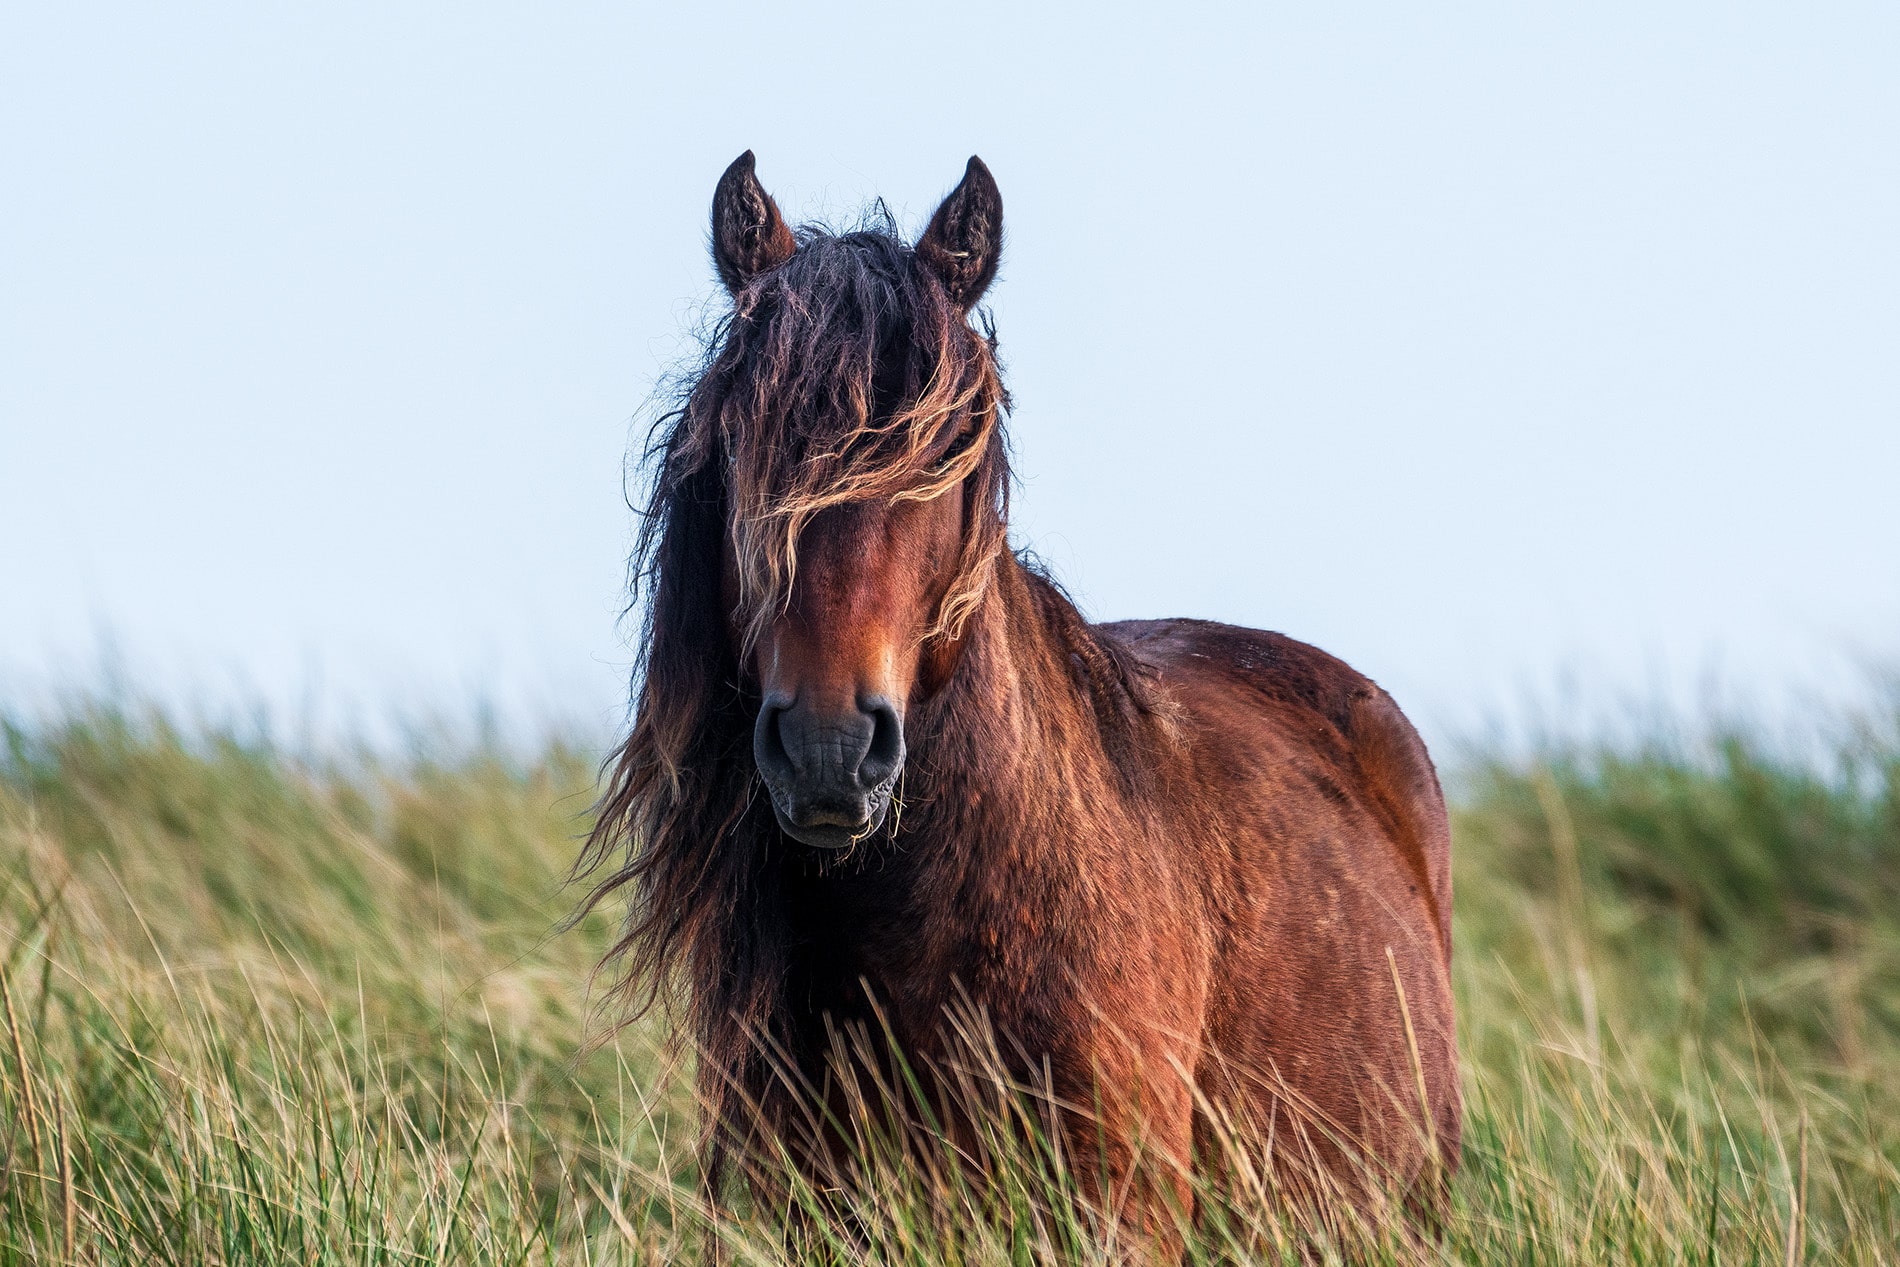 A wild horse in the marram grass on Sable Island, Nova Scotia - photo by Picture Perfect Tours and Geordie Mott